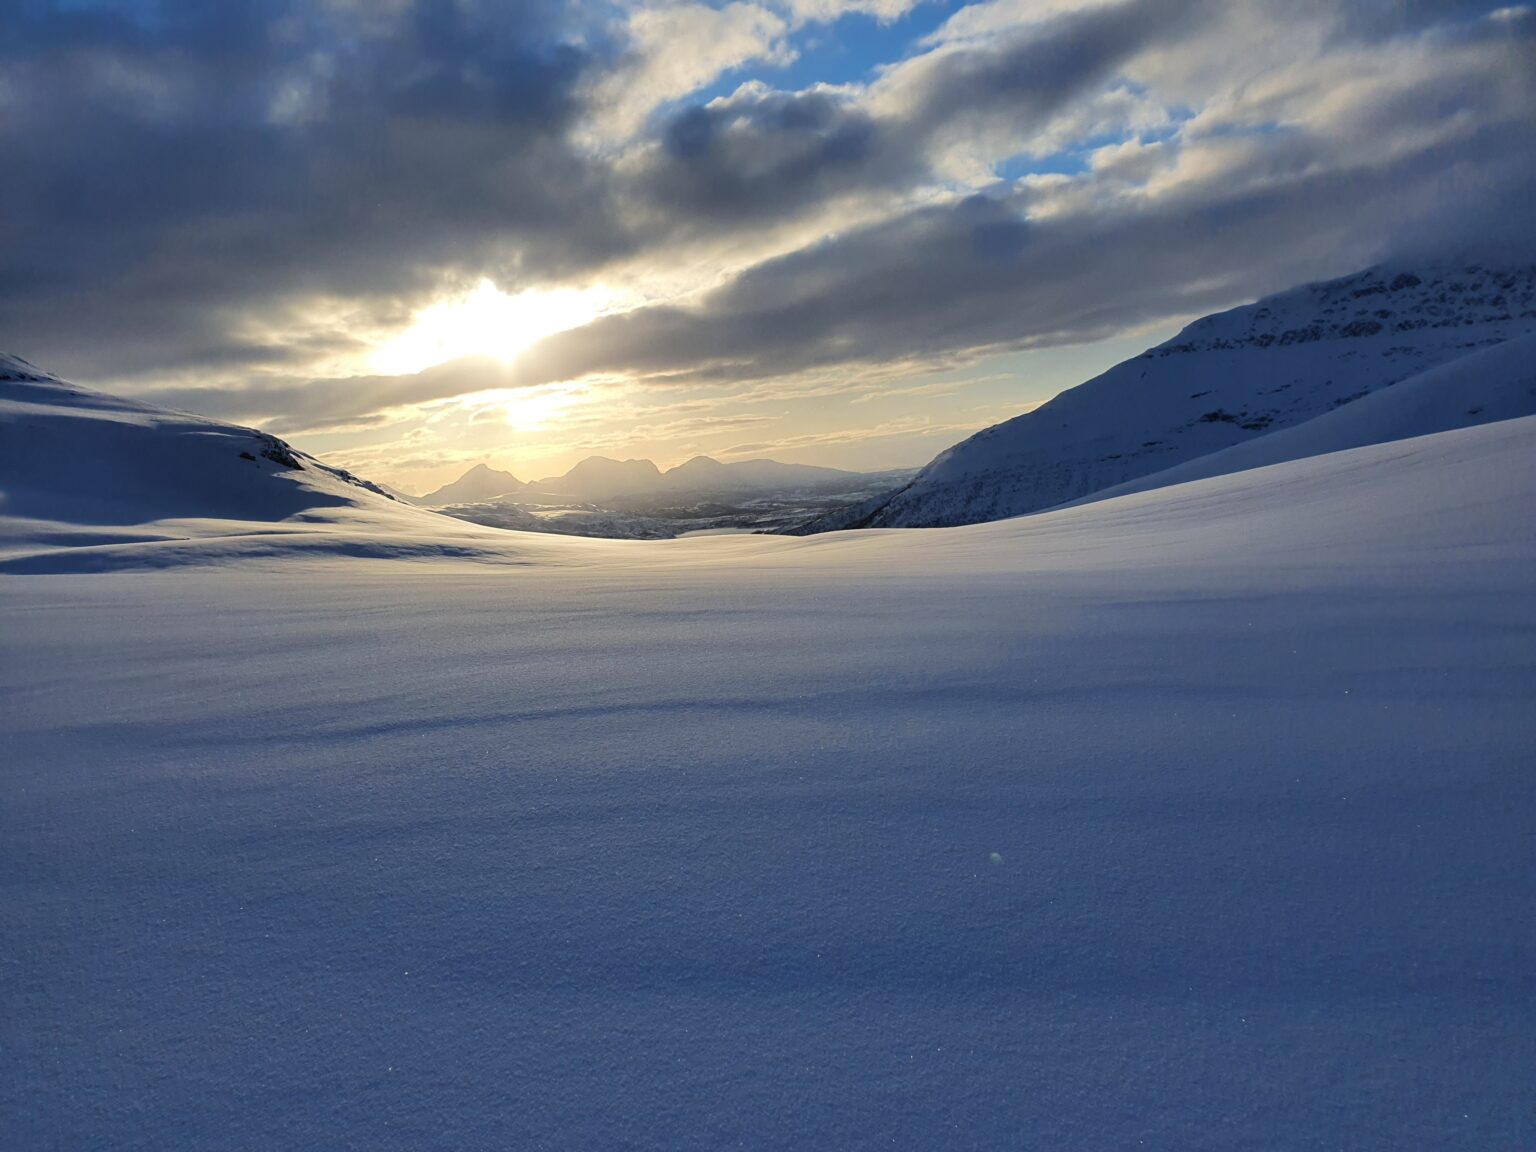 Ski touring to the midnight sun in the Tamokdalen Backcountry of Northern Norway